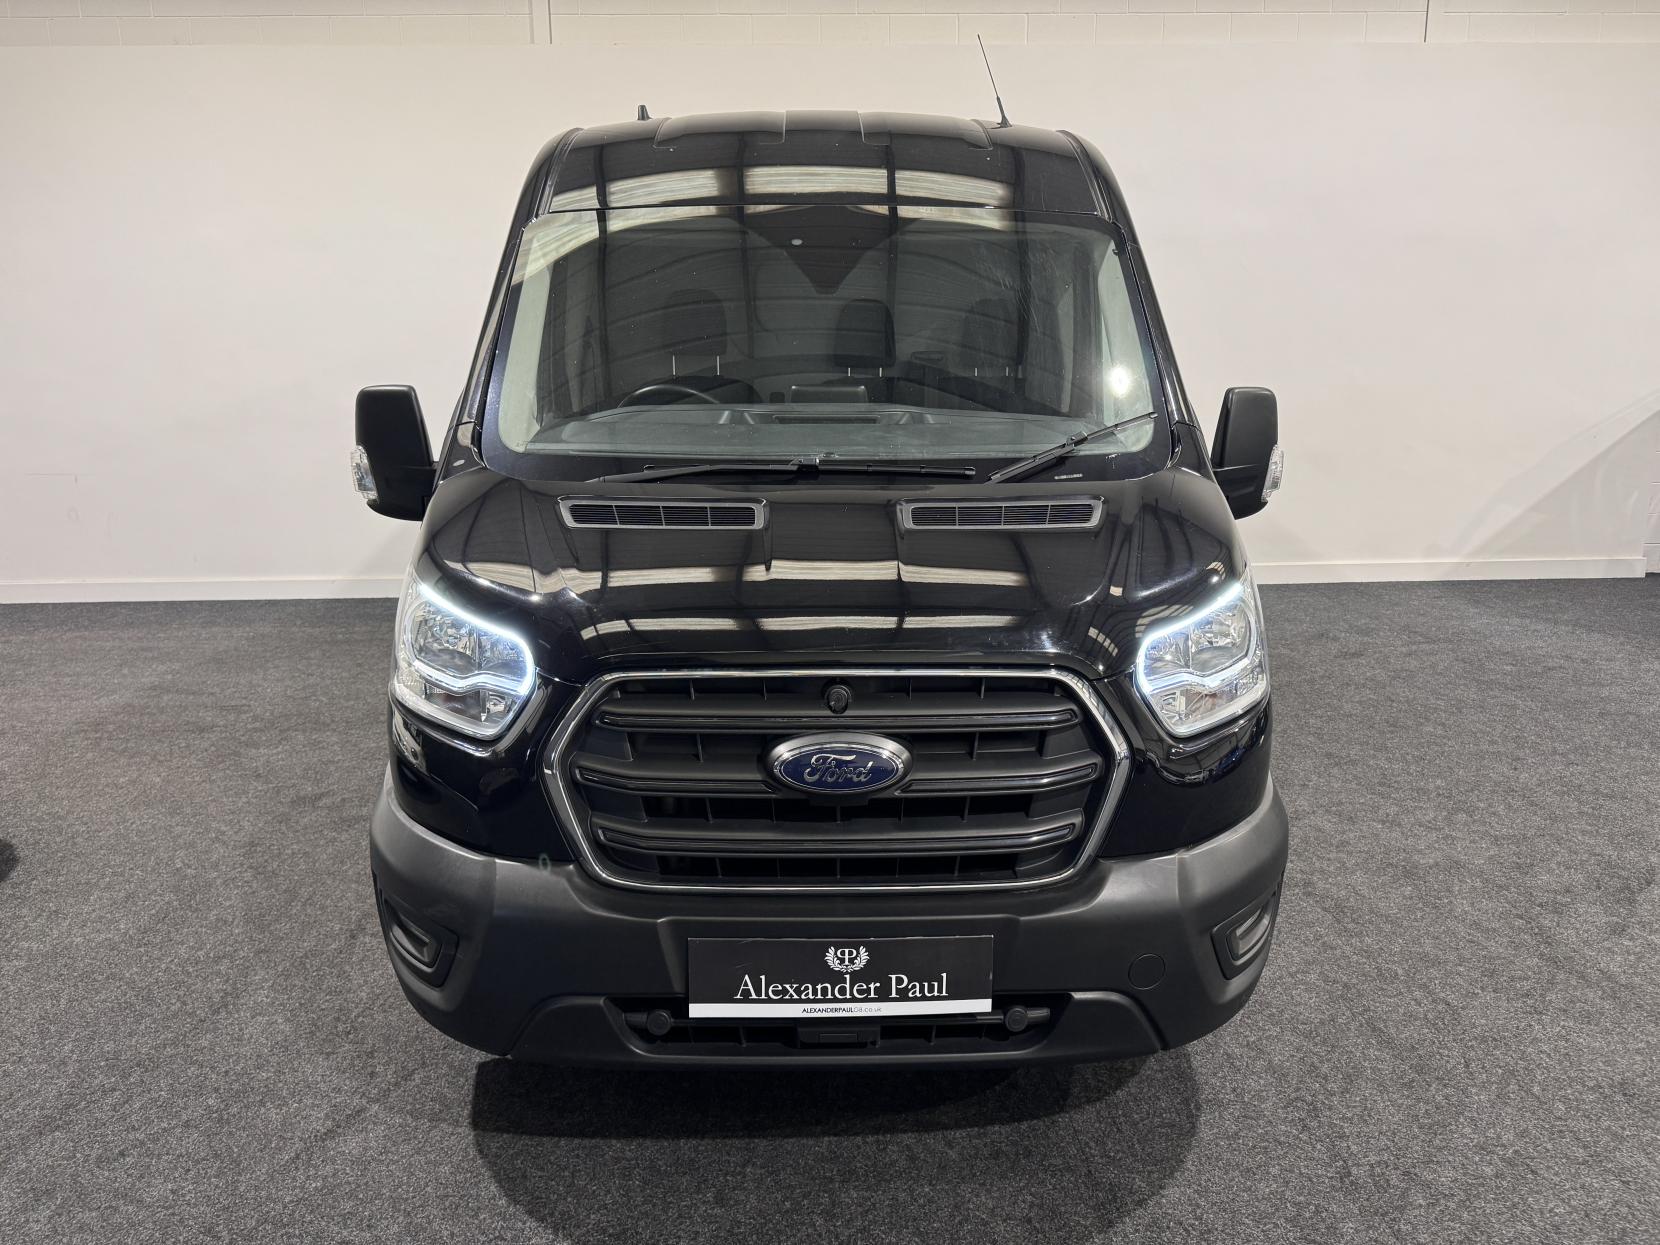 Ford Transit 2.0 310 EcoBlue Trend Panel Van 5dr Diesel Manual FWD L3 H2 Euro 6 (s/s) (130 ps)